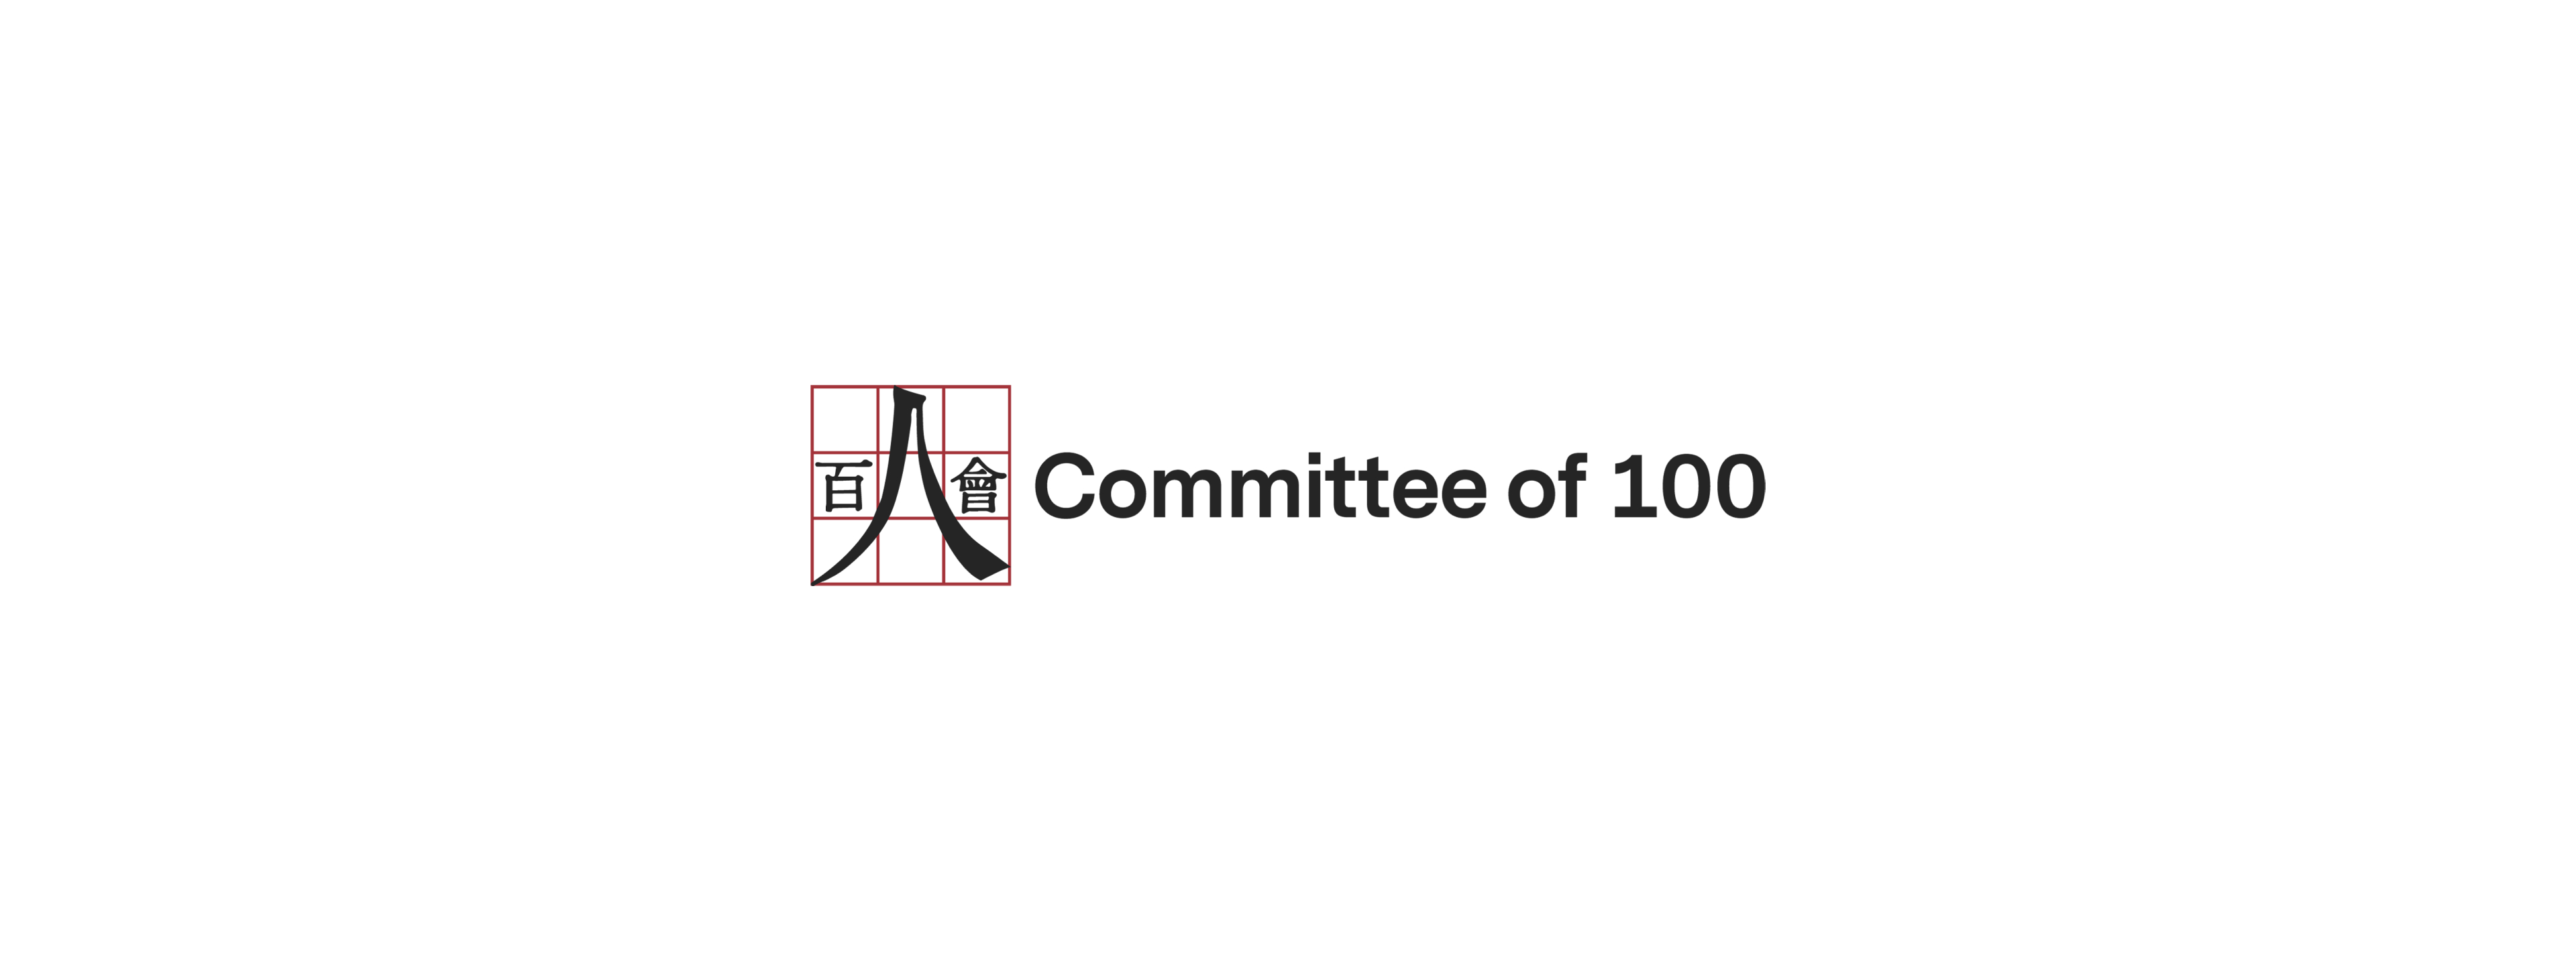 Committee of 100 Elects New Chairman and Board Members